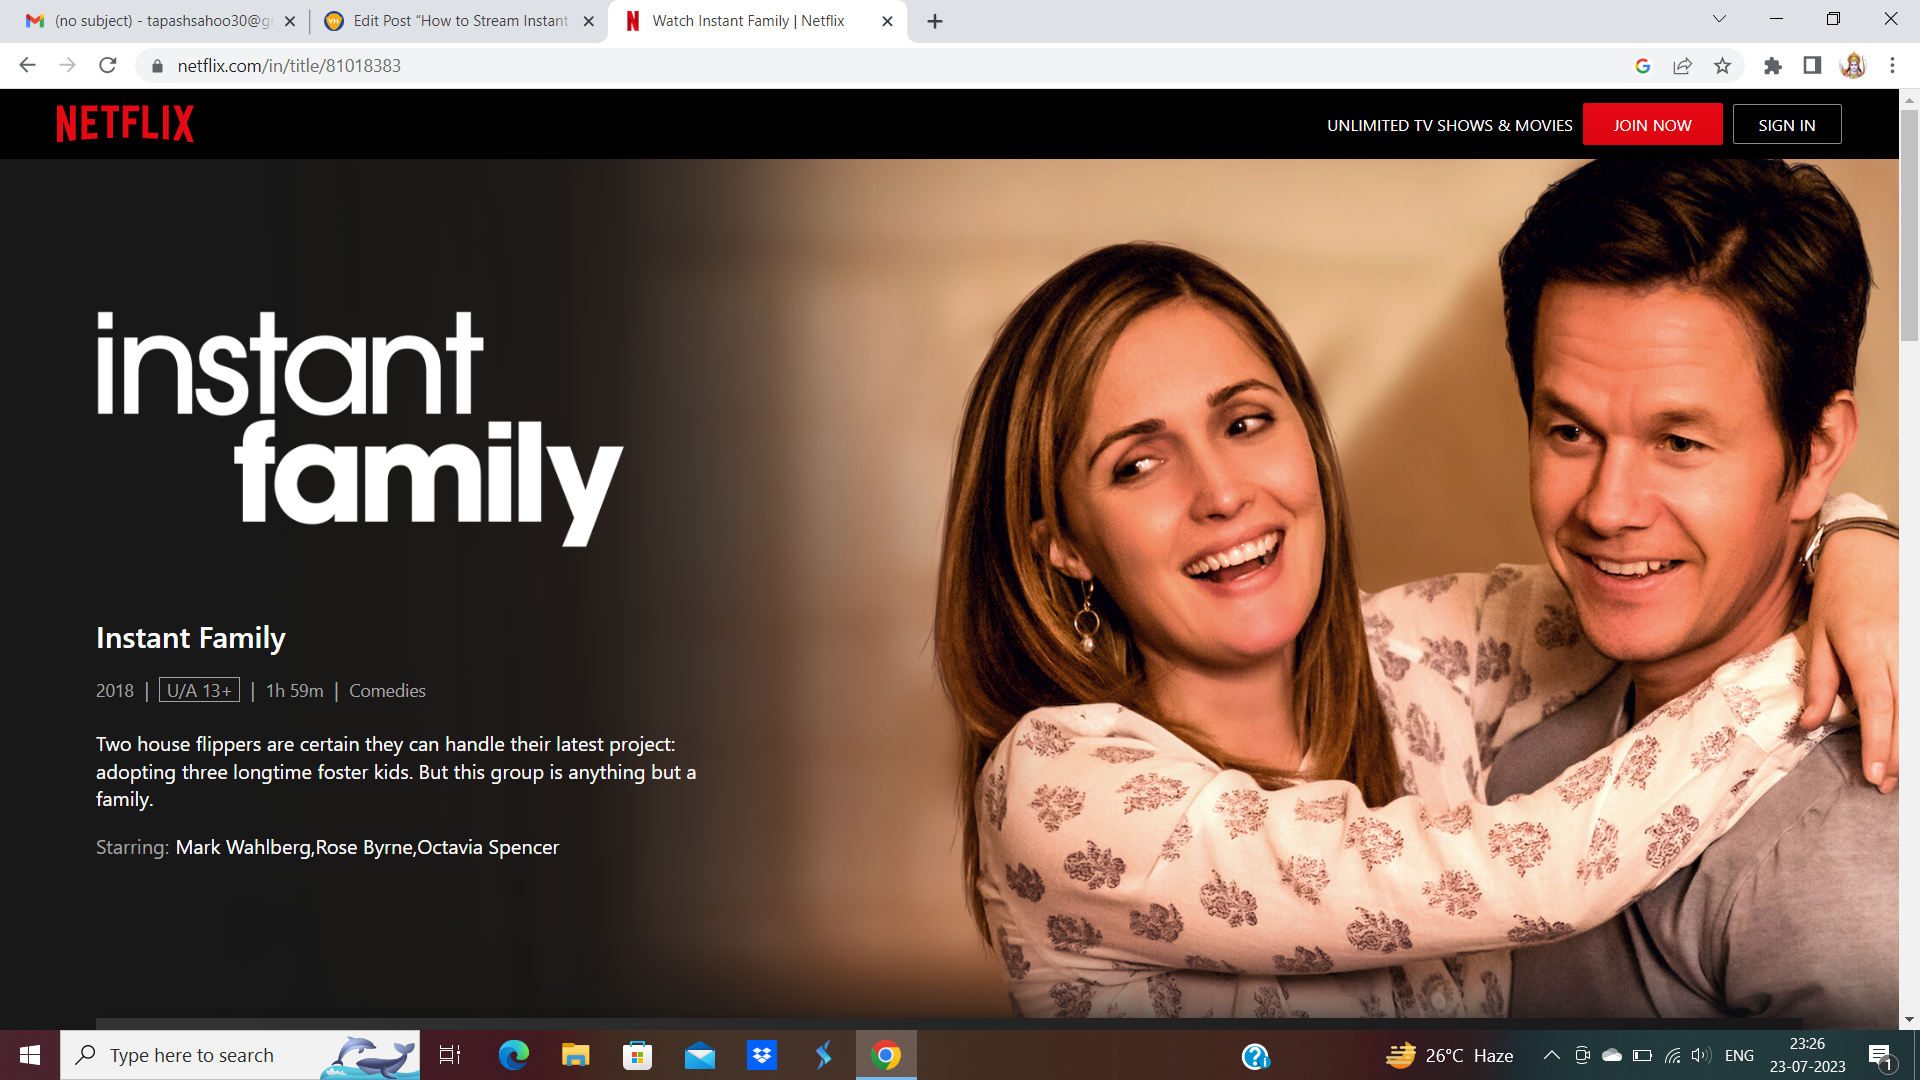 Watch Instant Family on Netflix